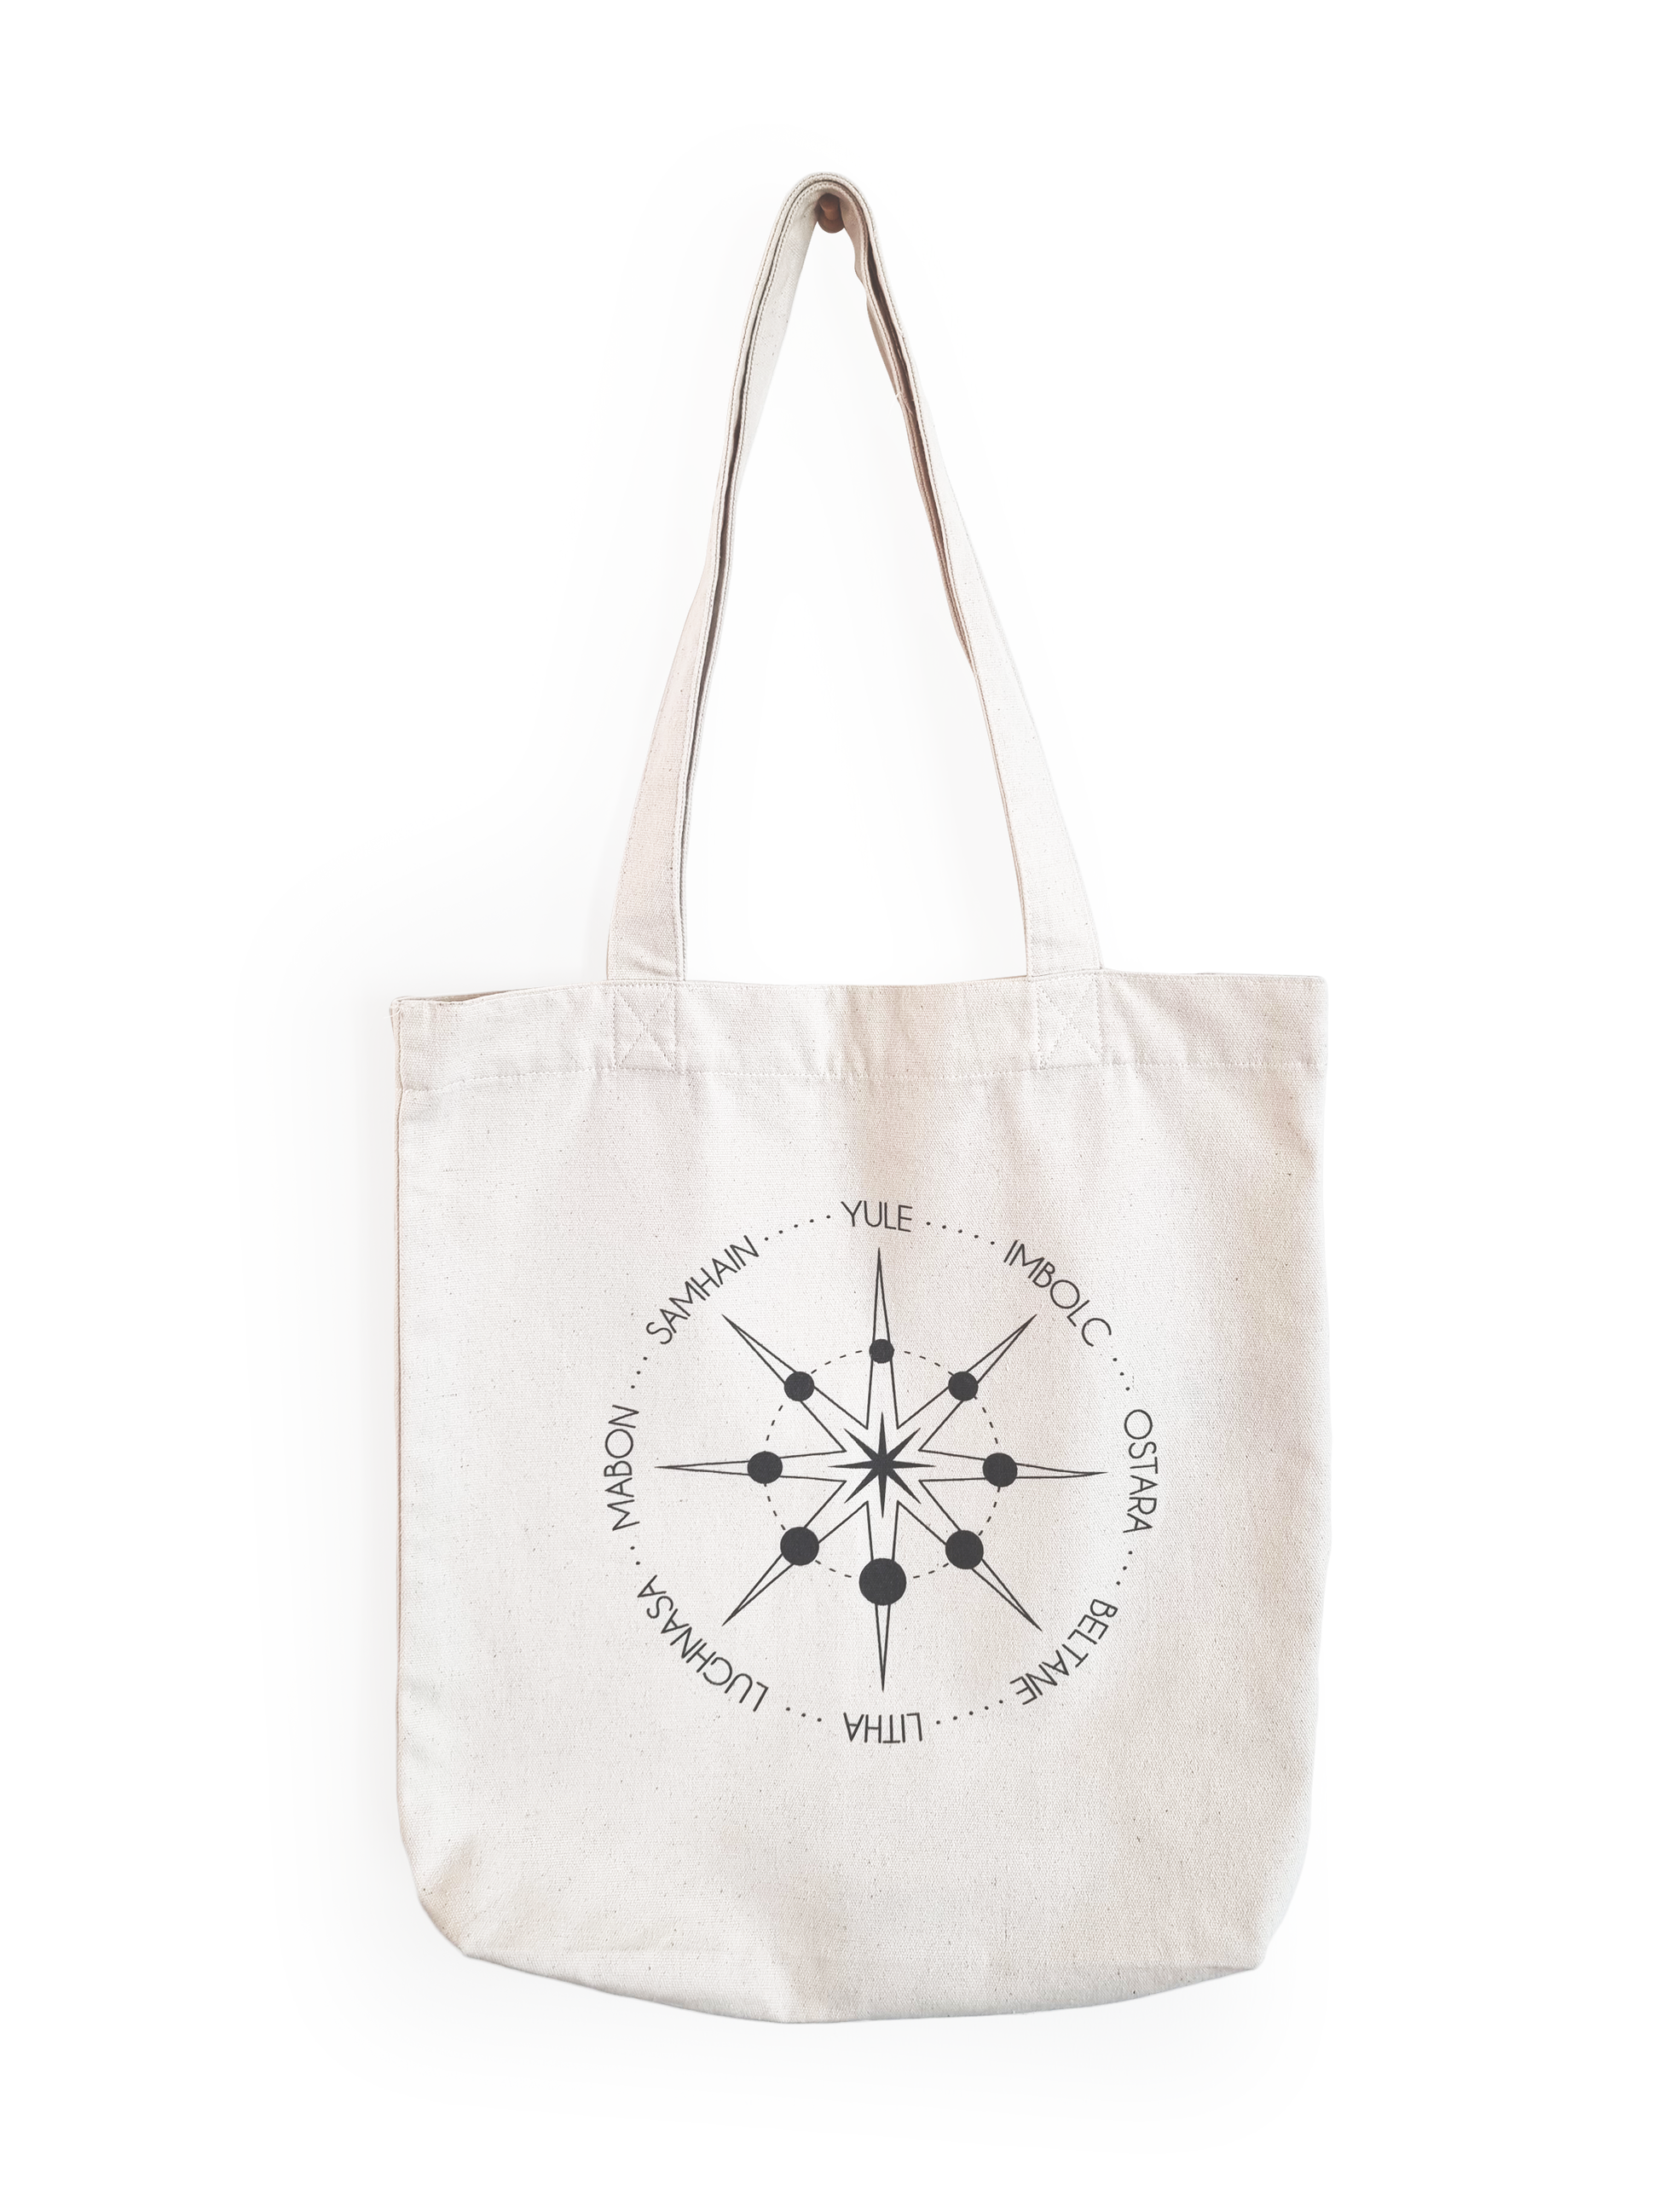 Ethical and sustainable, natural raw, organic and recycled tote bag / shopping bag / shopper with a printed witchy / pagan / wiccan / spiritual wheel of the year design for yoga, gym, or lounge wear.